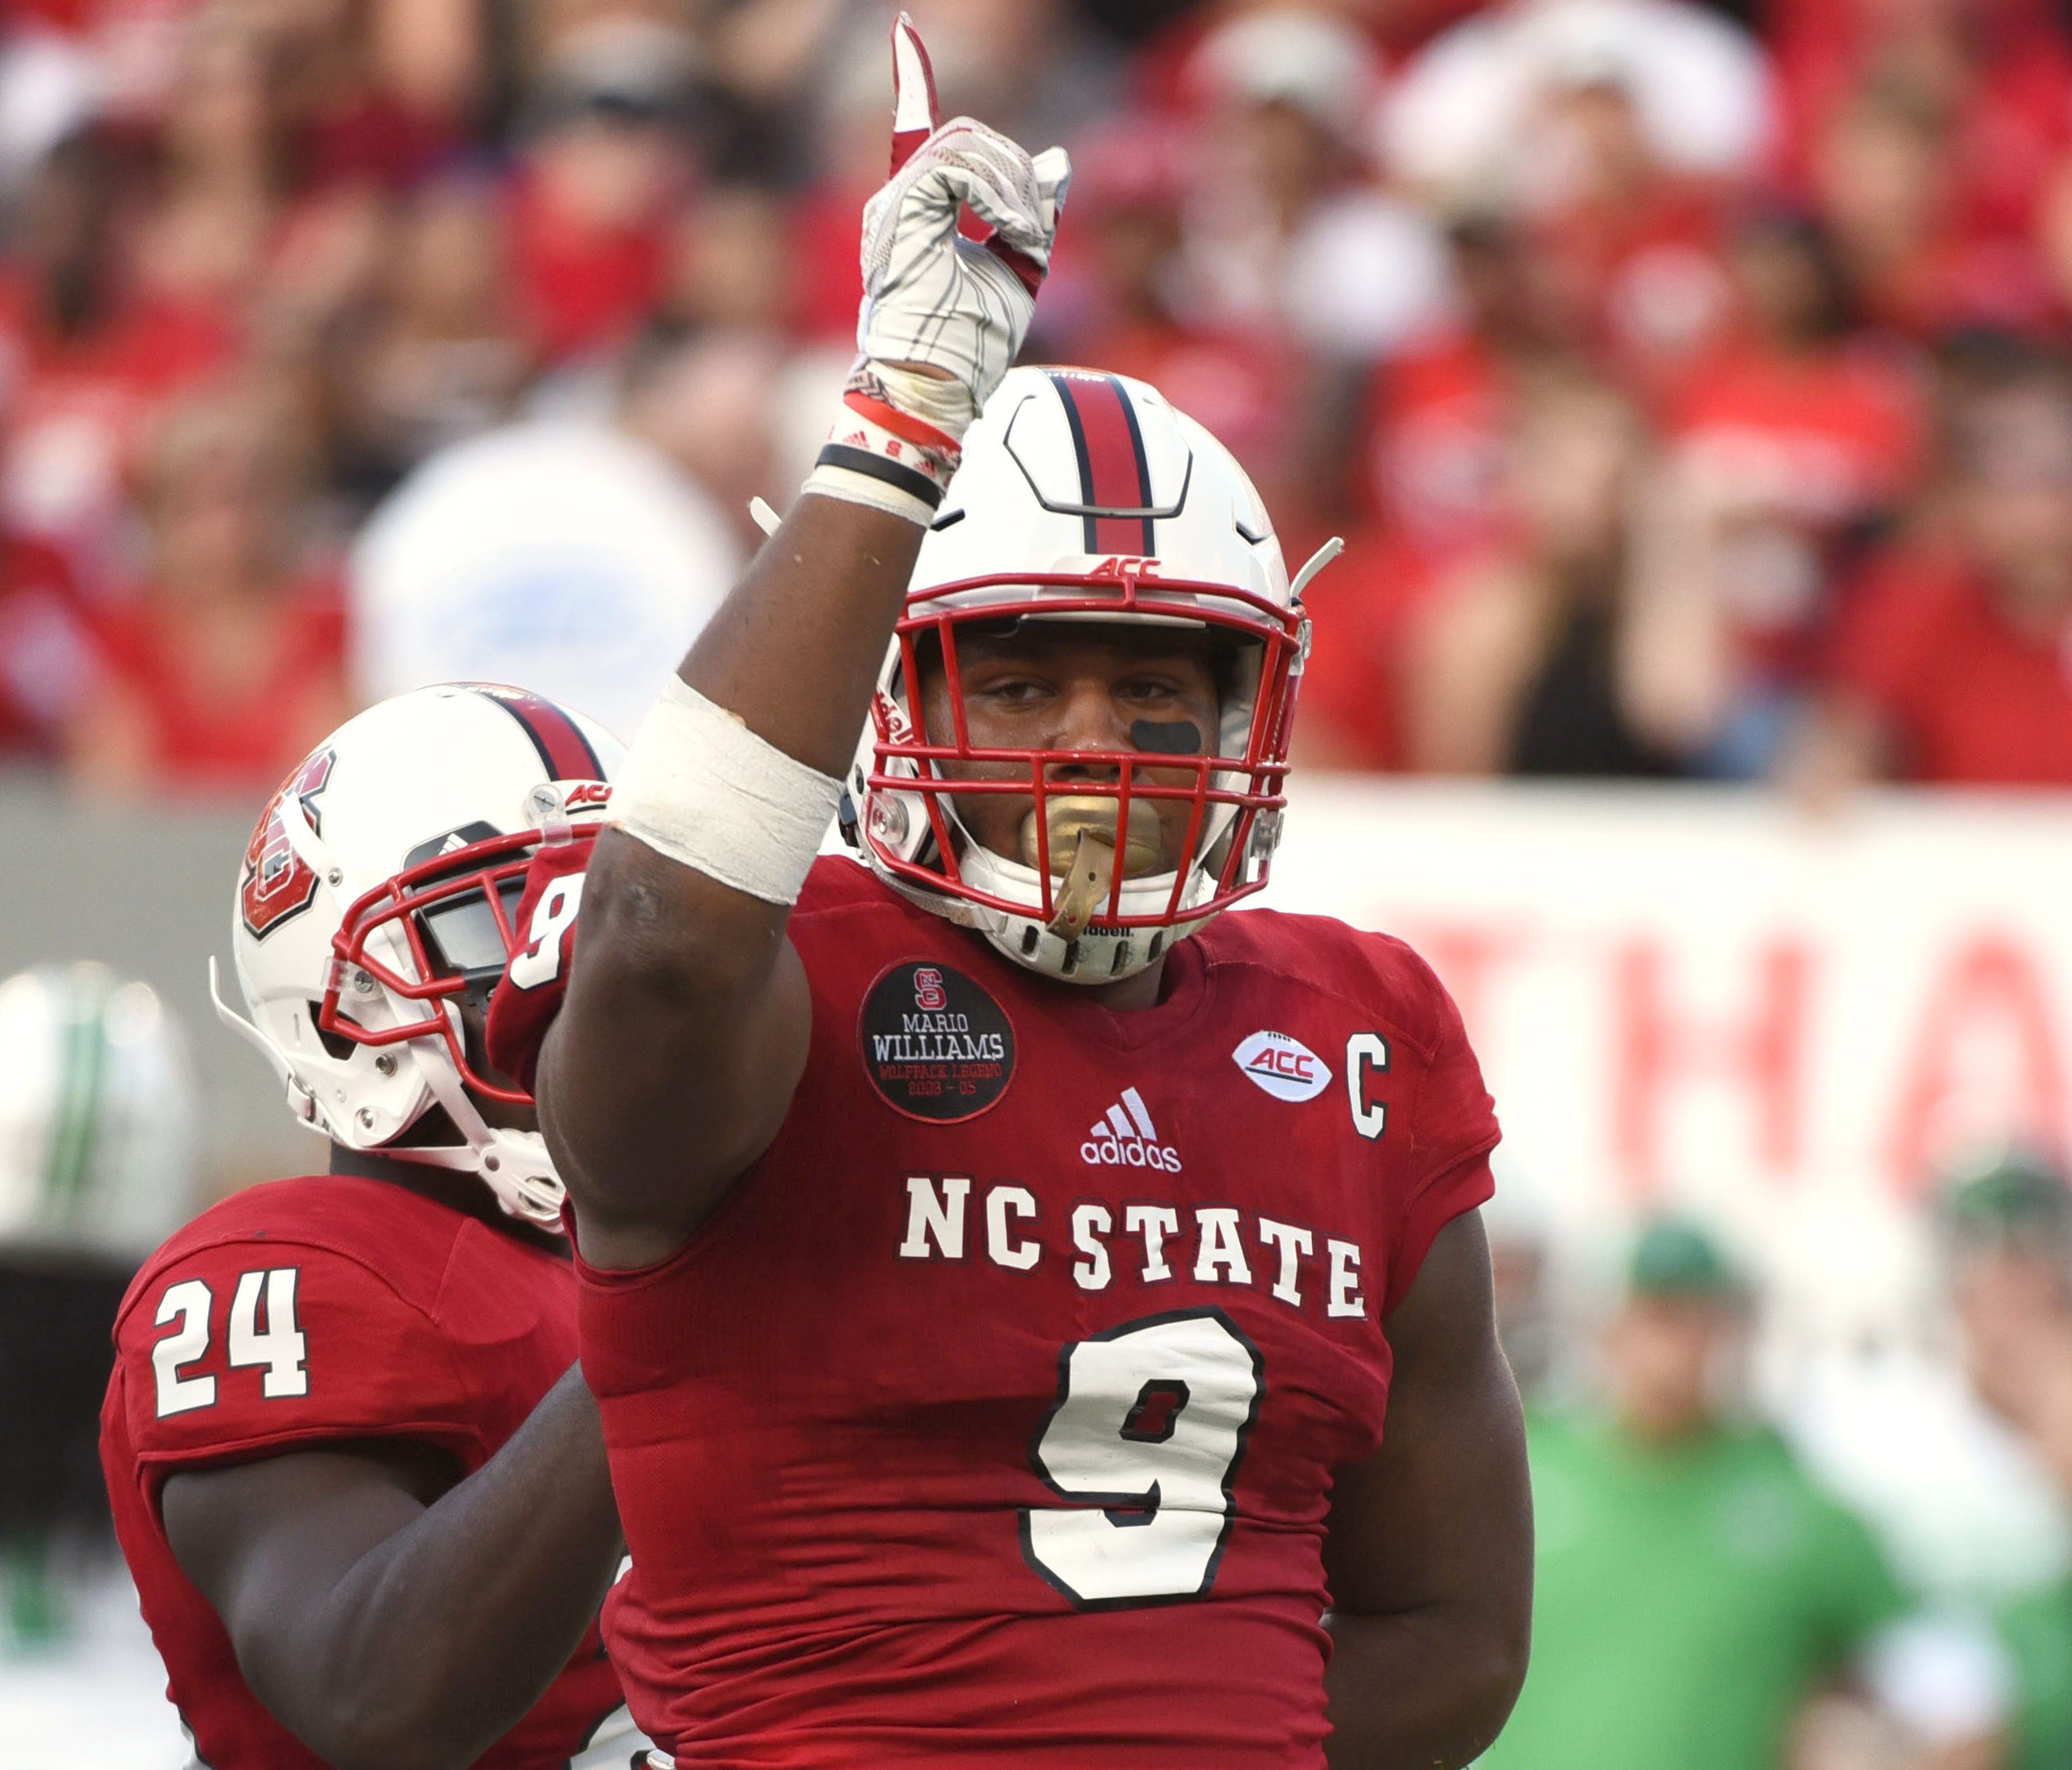 N.C. State DE Bradley Chubb is one of the draft's elite non-quarterback prospects.